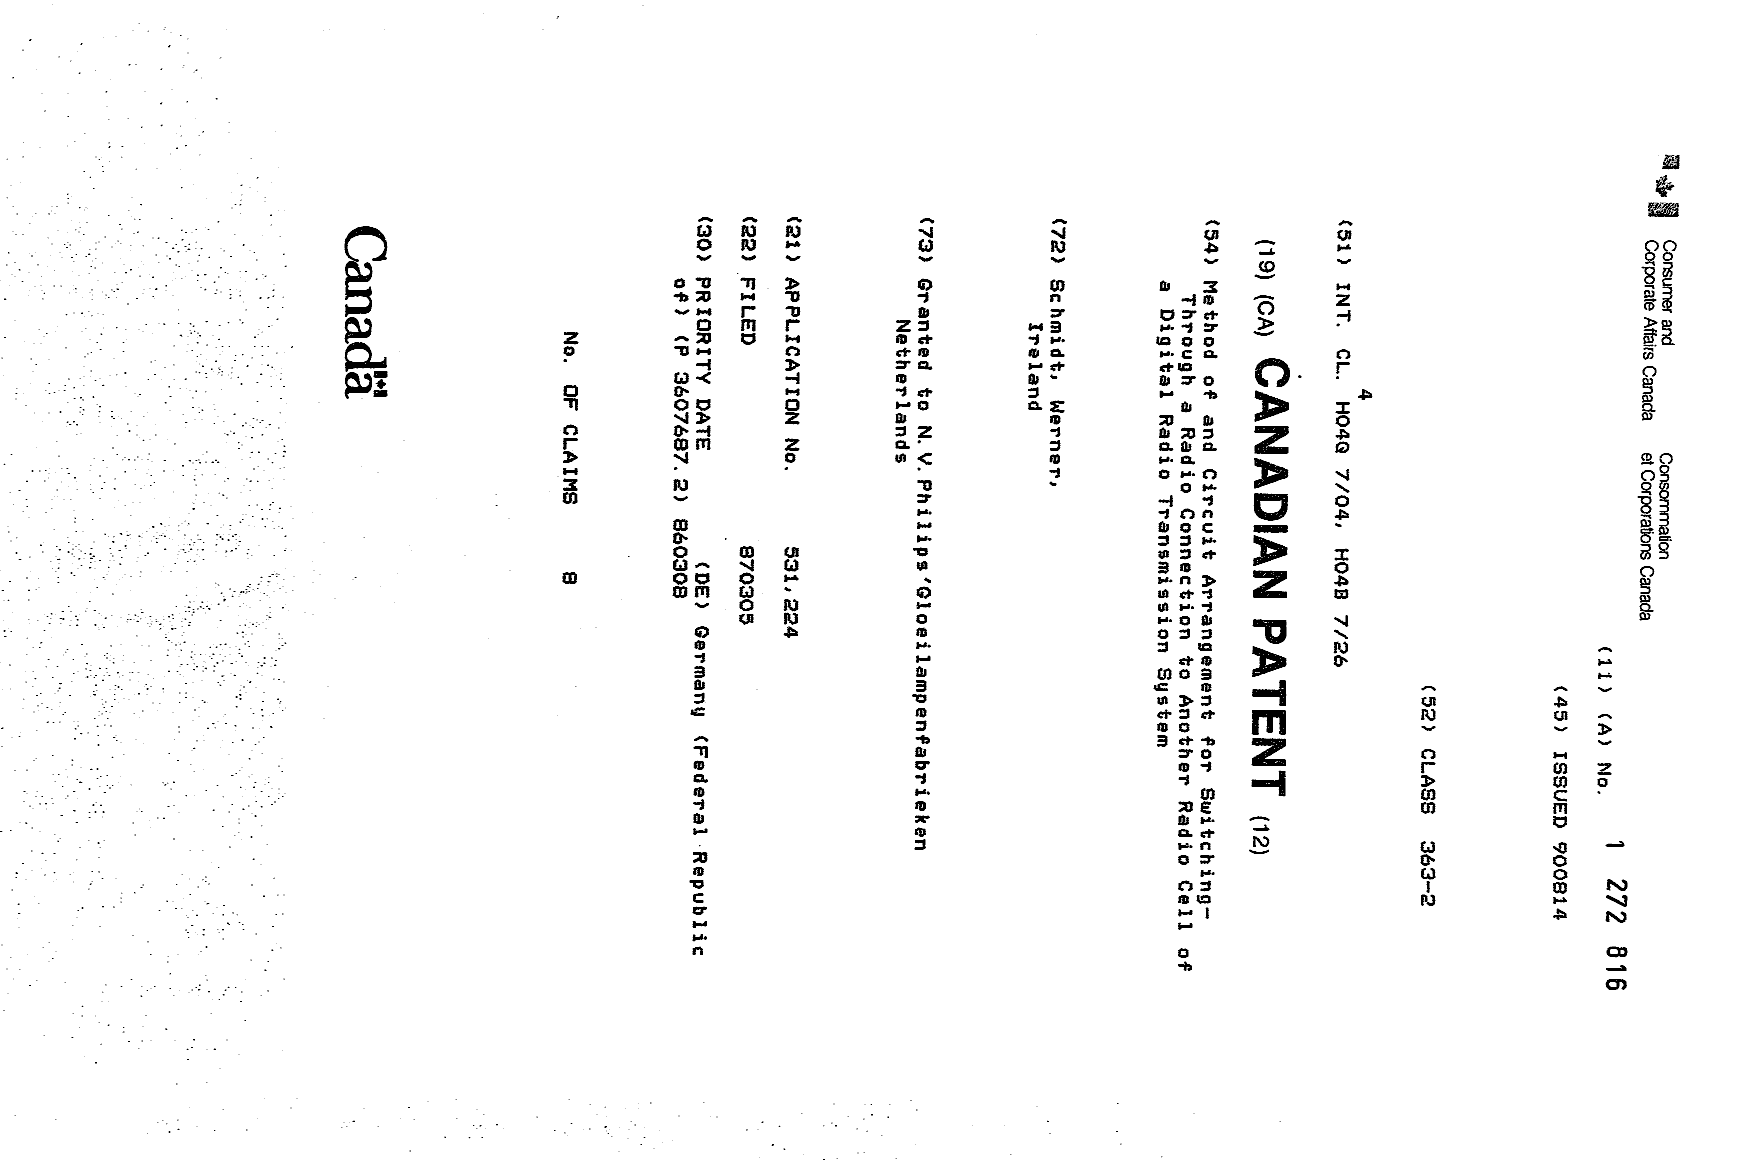 Canadian Patent Document 1272816. Cover Page 19931008. Image 1 of 1